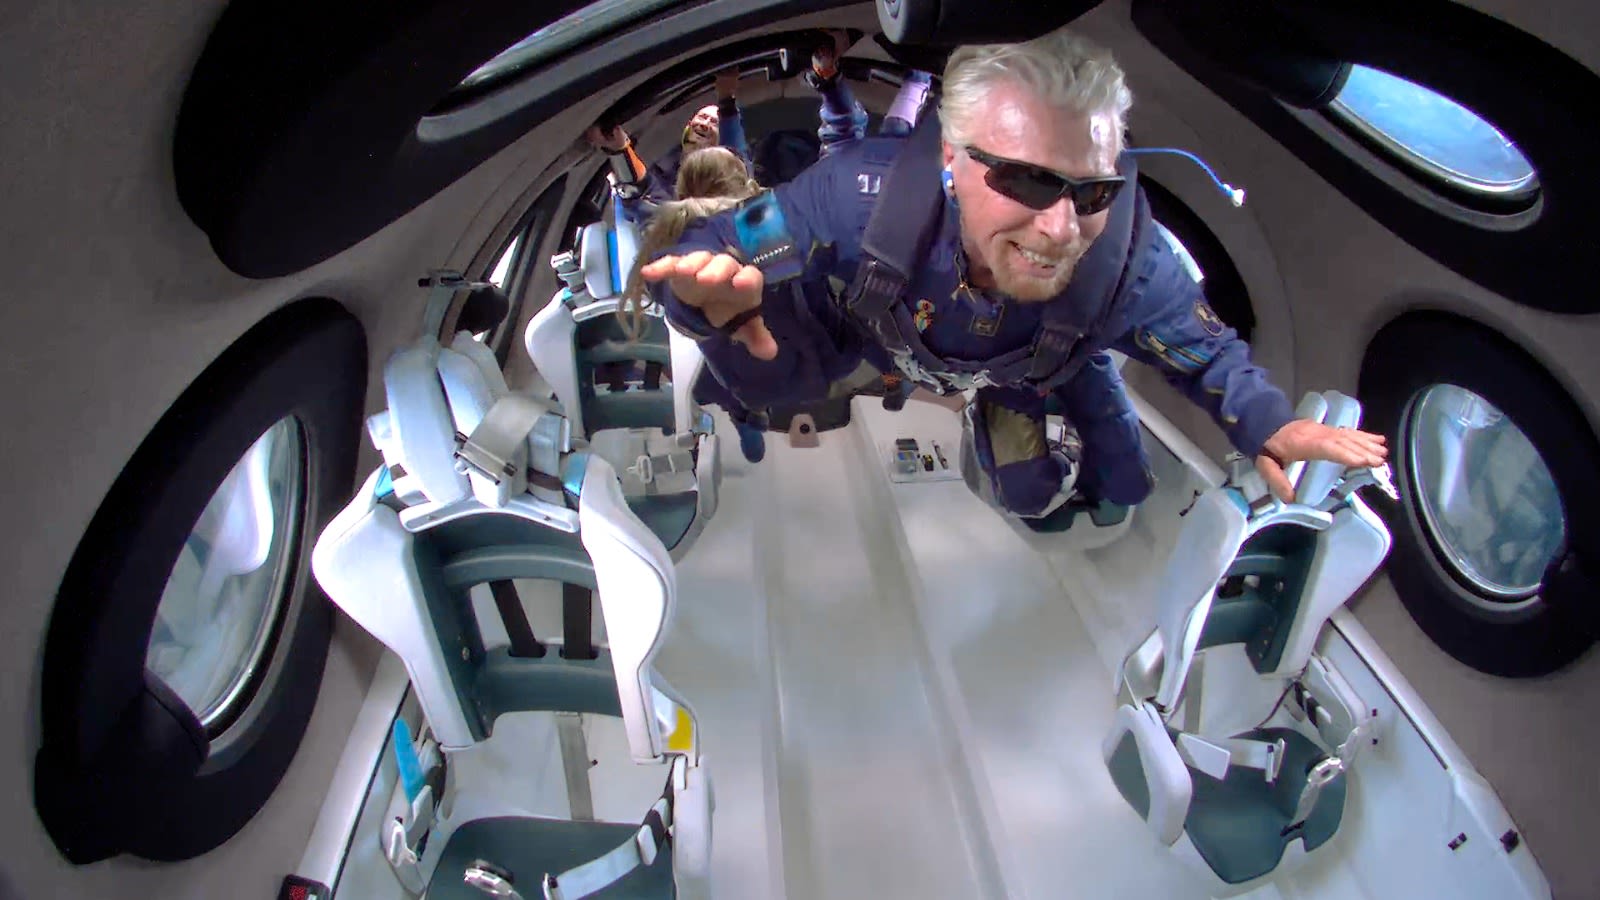 Richard Branson experiencing weightlessness during the Virgin Galactic Unity 22 spaceflight